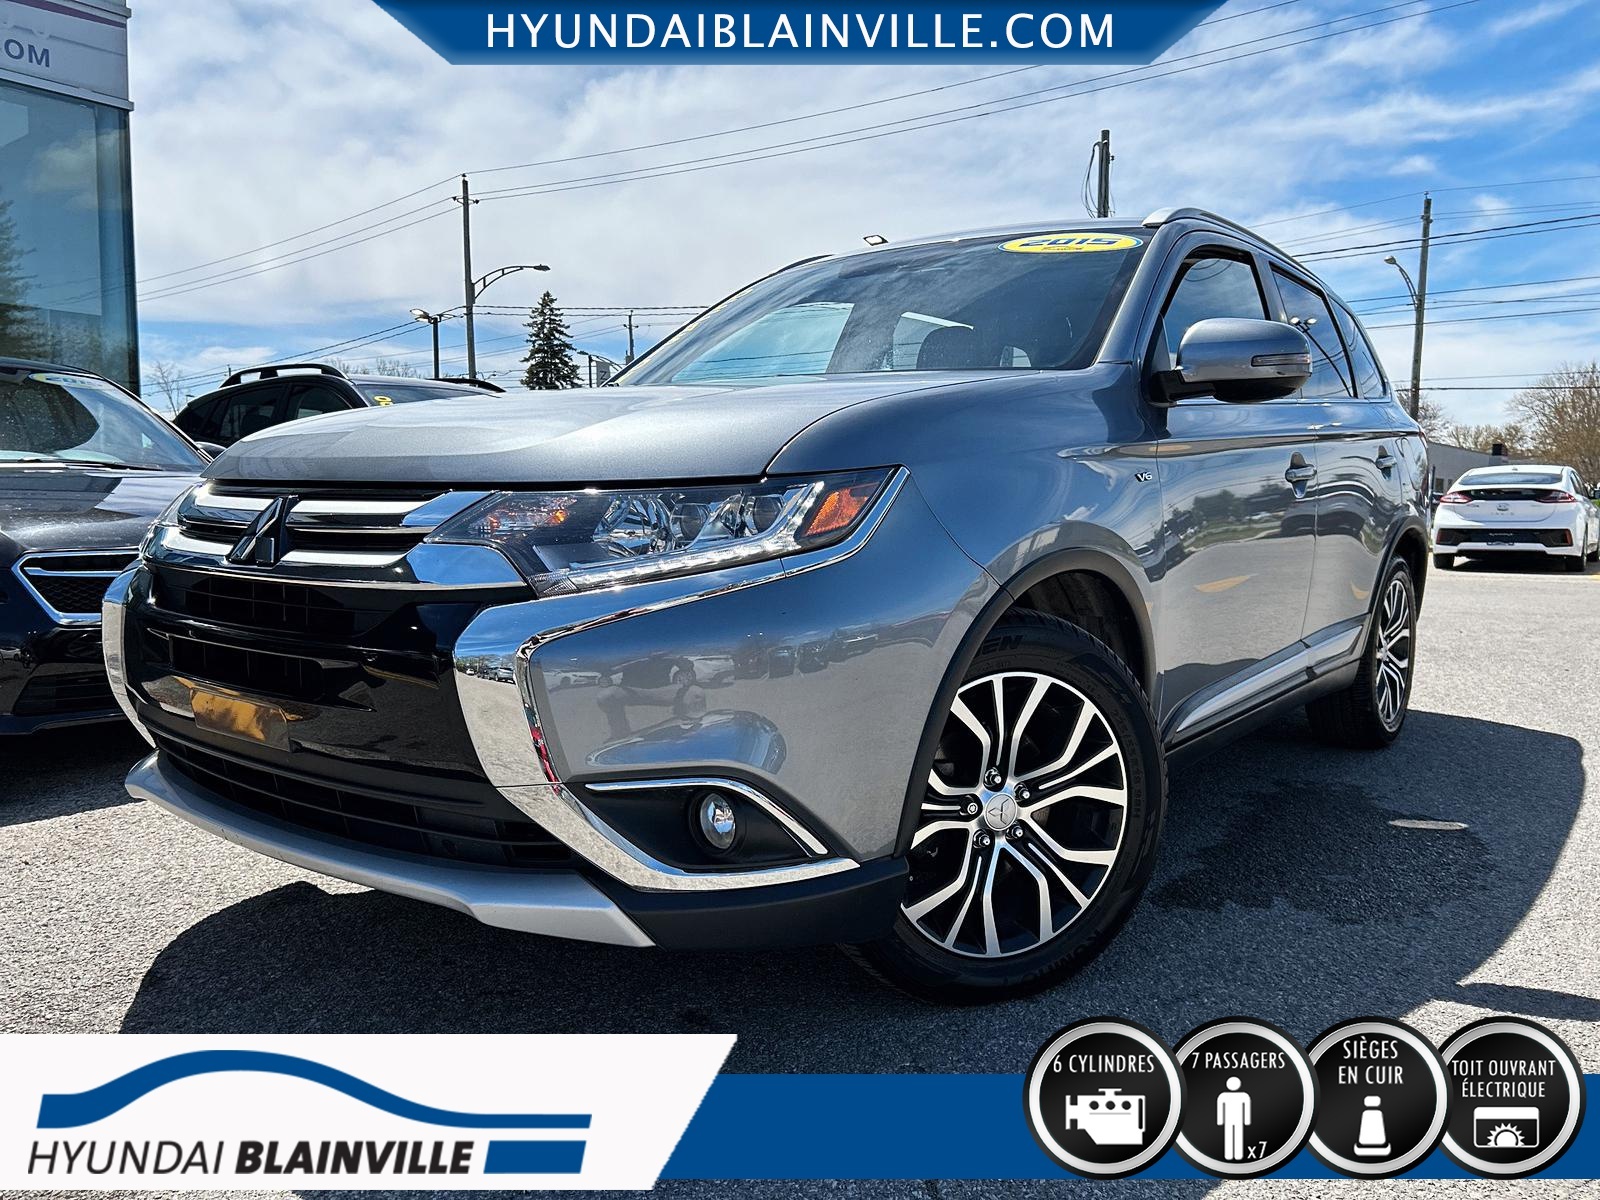 2016 Mitsubishi Outlander GT, V6, AWD, 7 PASSAGERS, CUIR, TOIT OUVRANT+